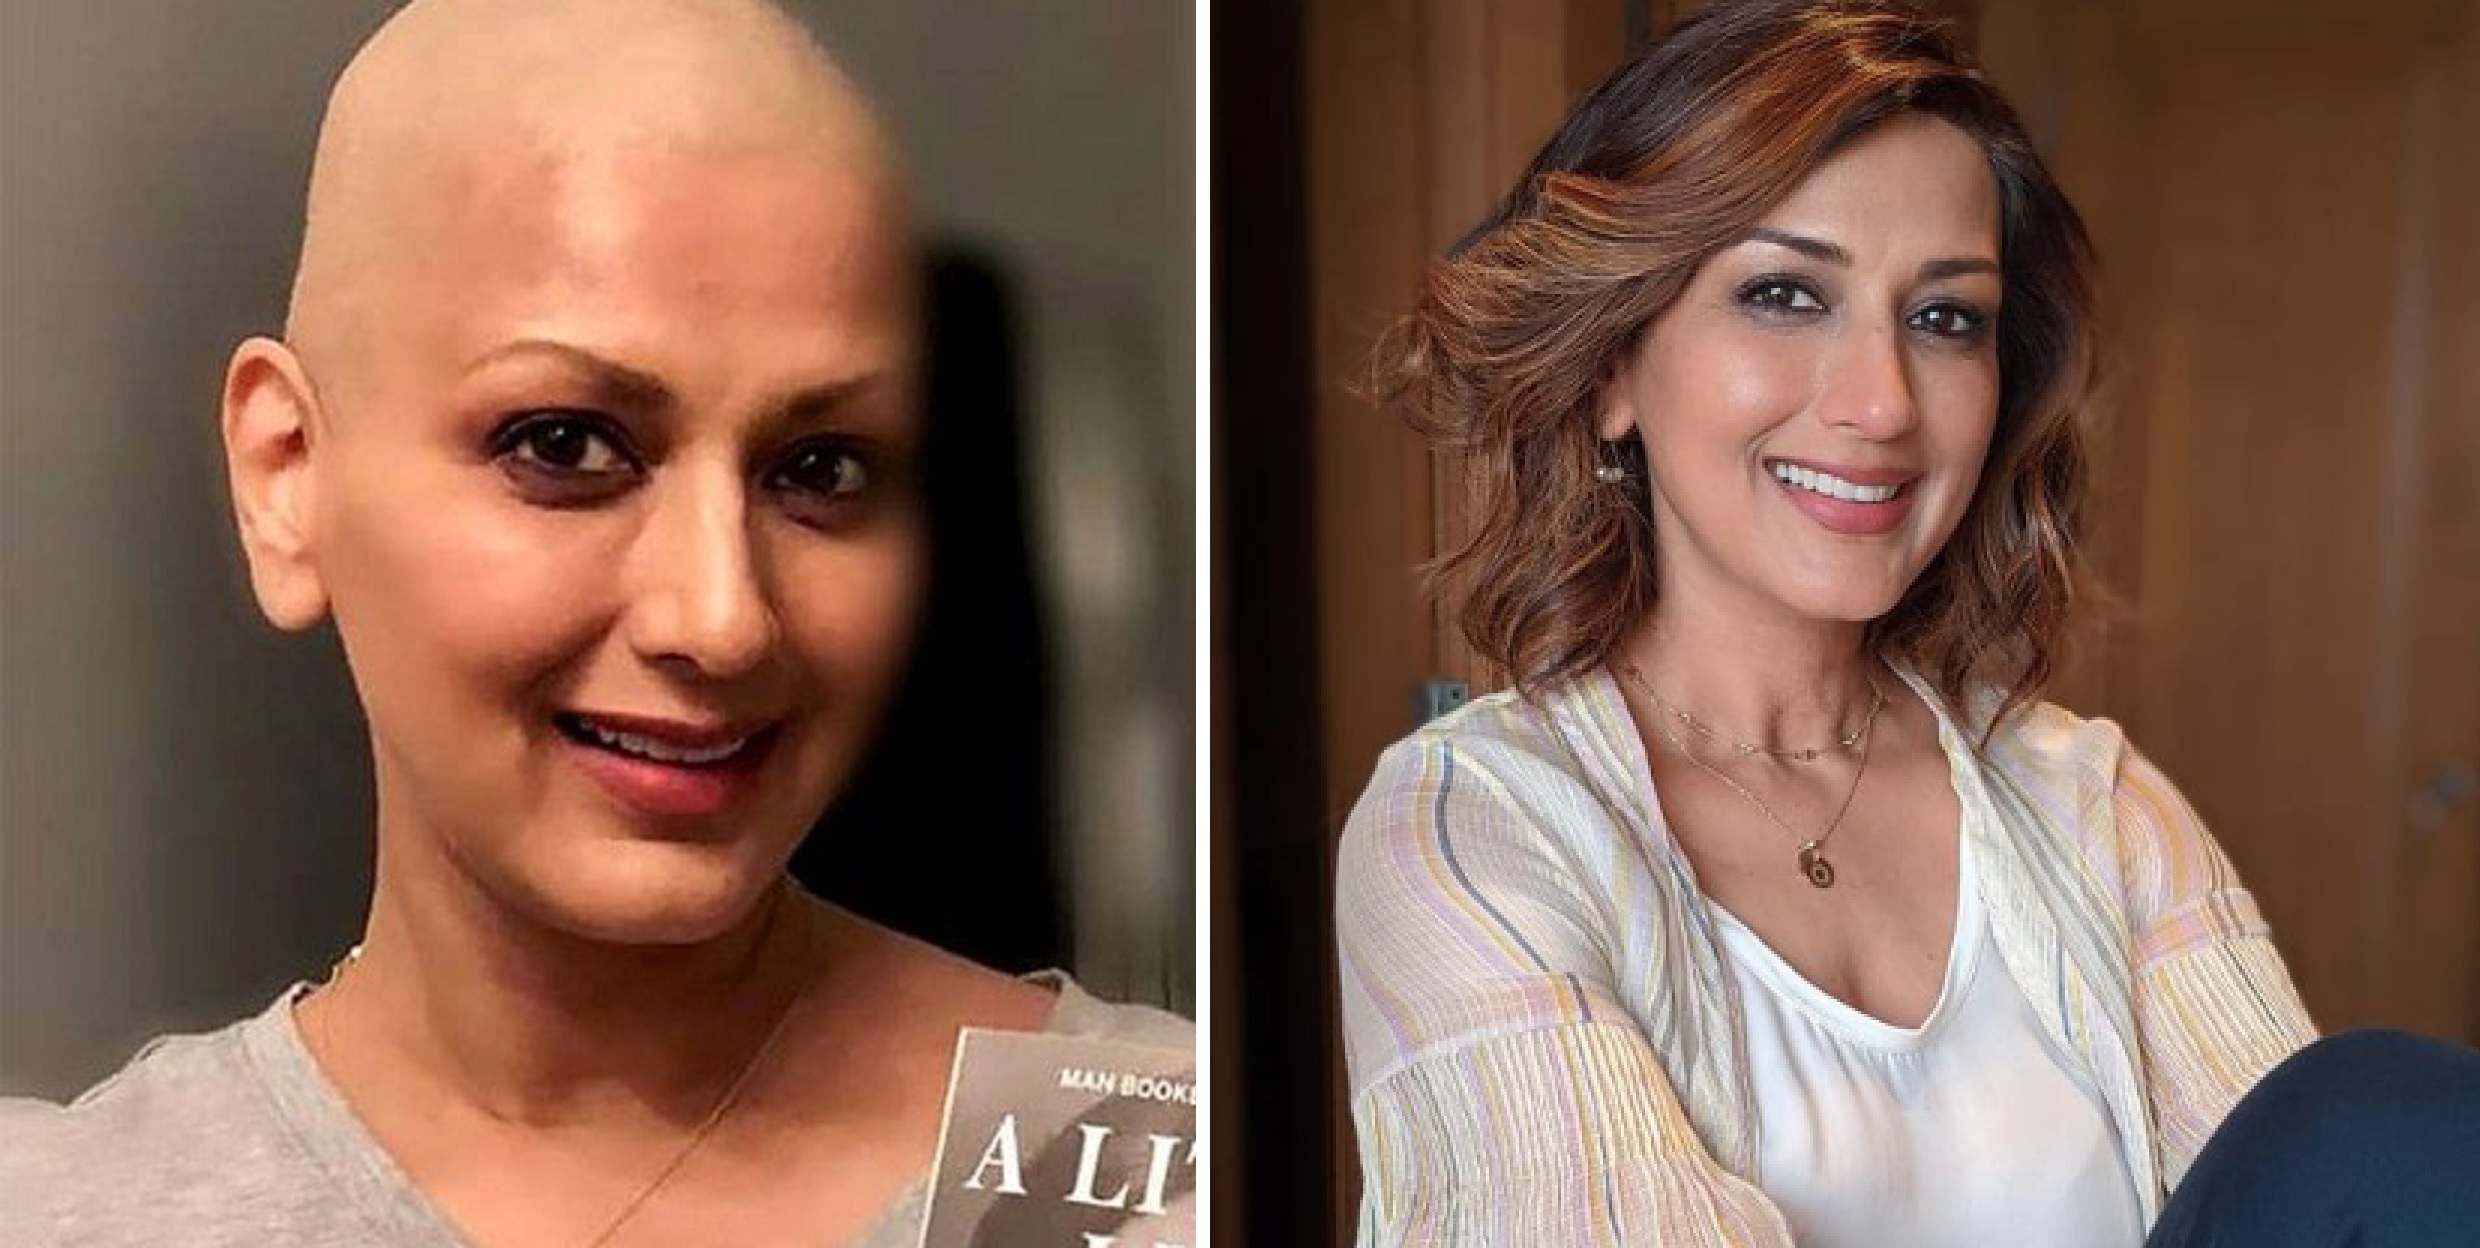 Sonali Bendre Becomes Emotional As She Revisits Her Cancer Hospital, “This chair, this view, this same spot… 4 years later”